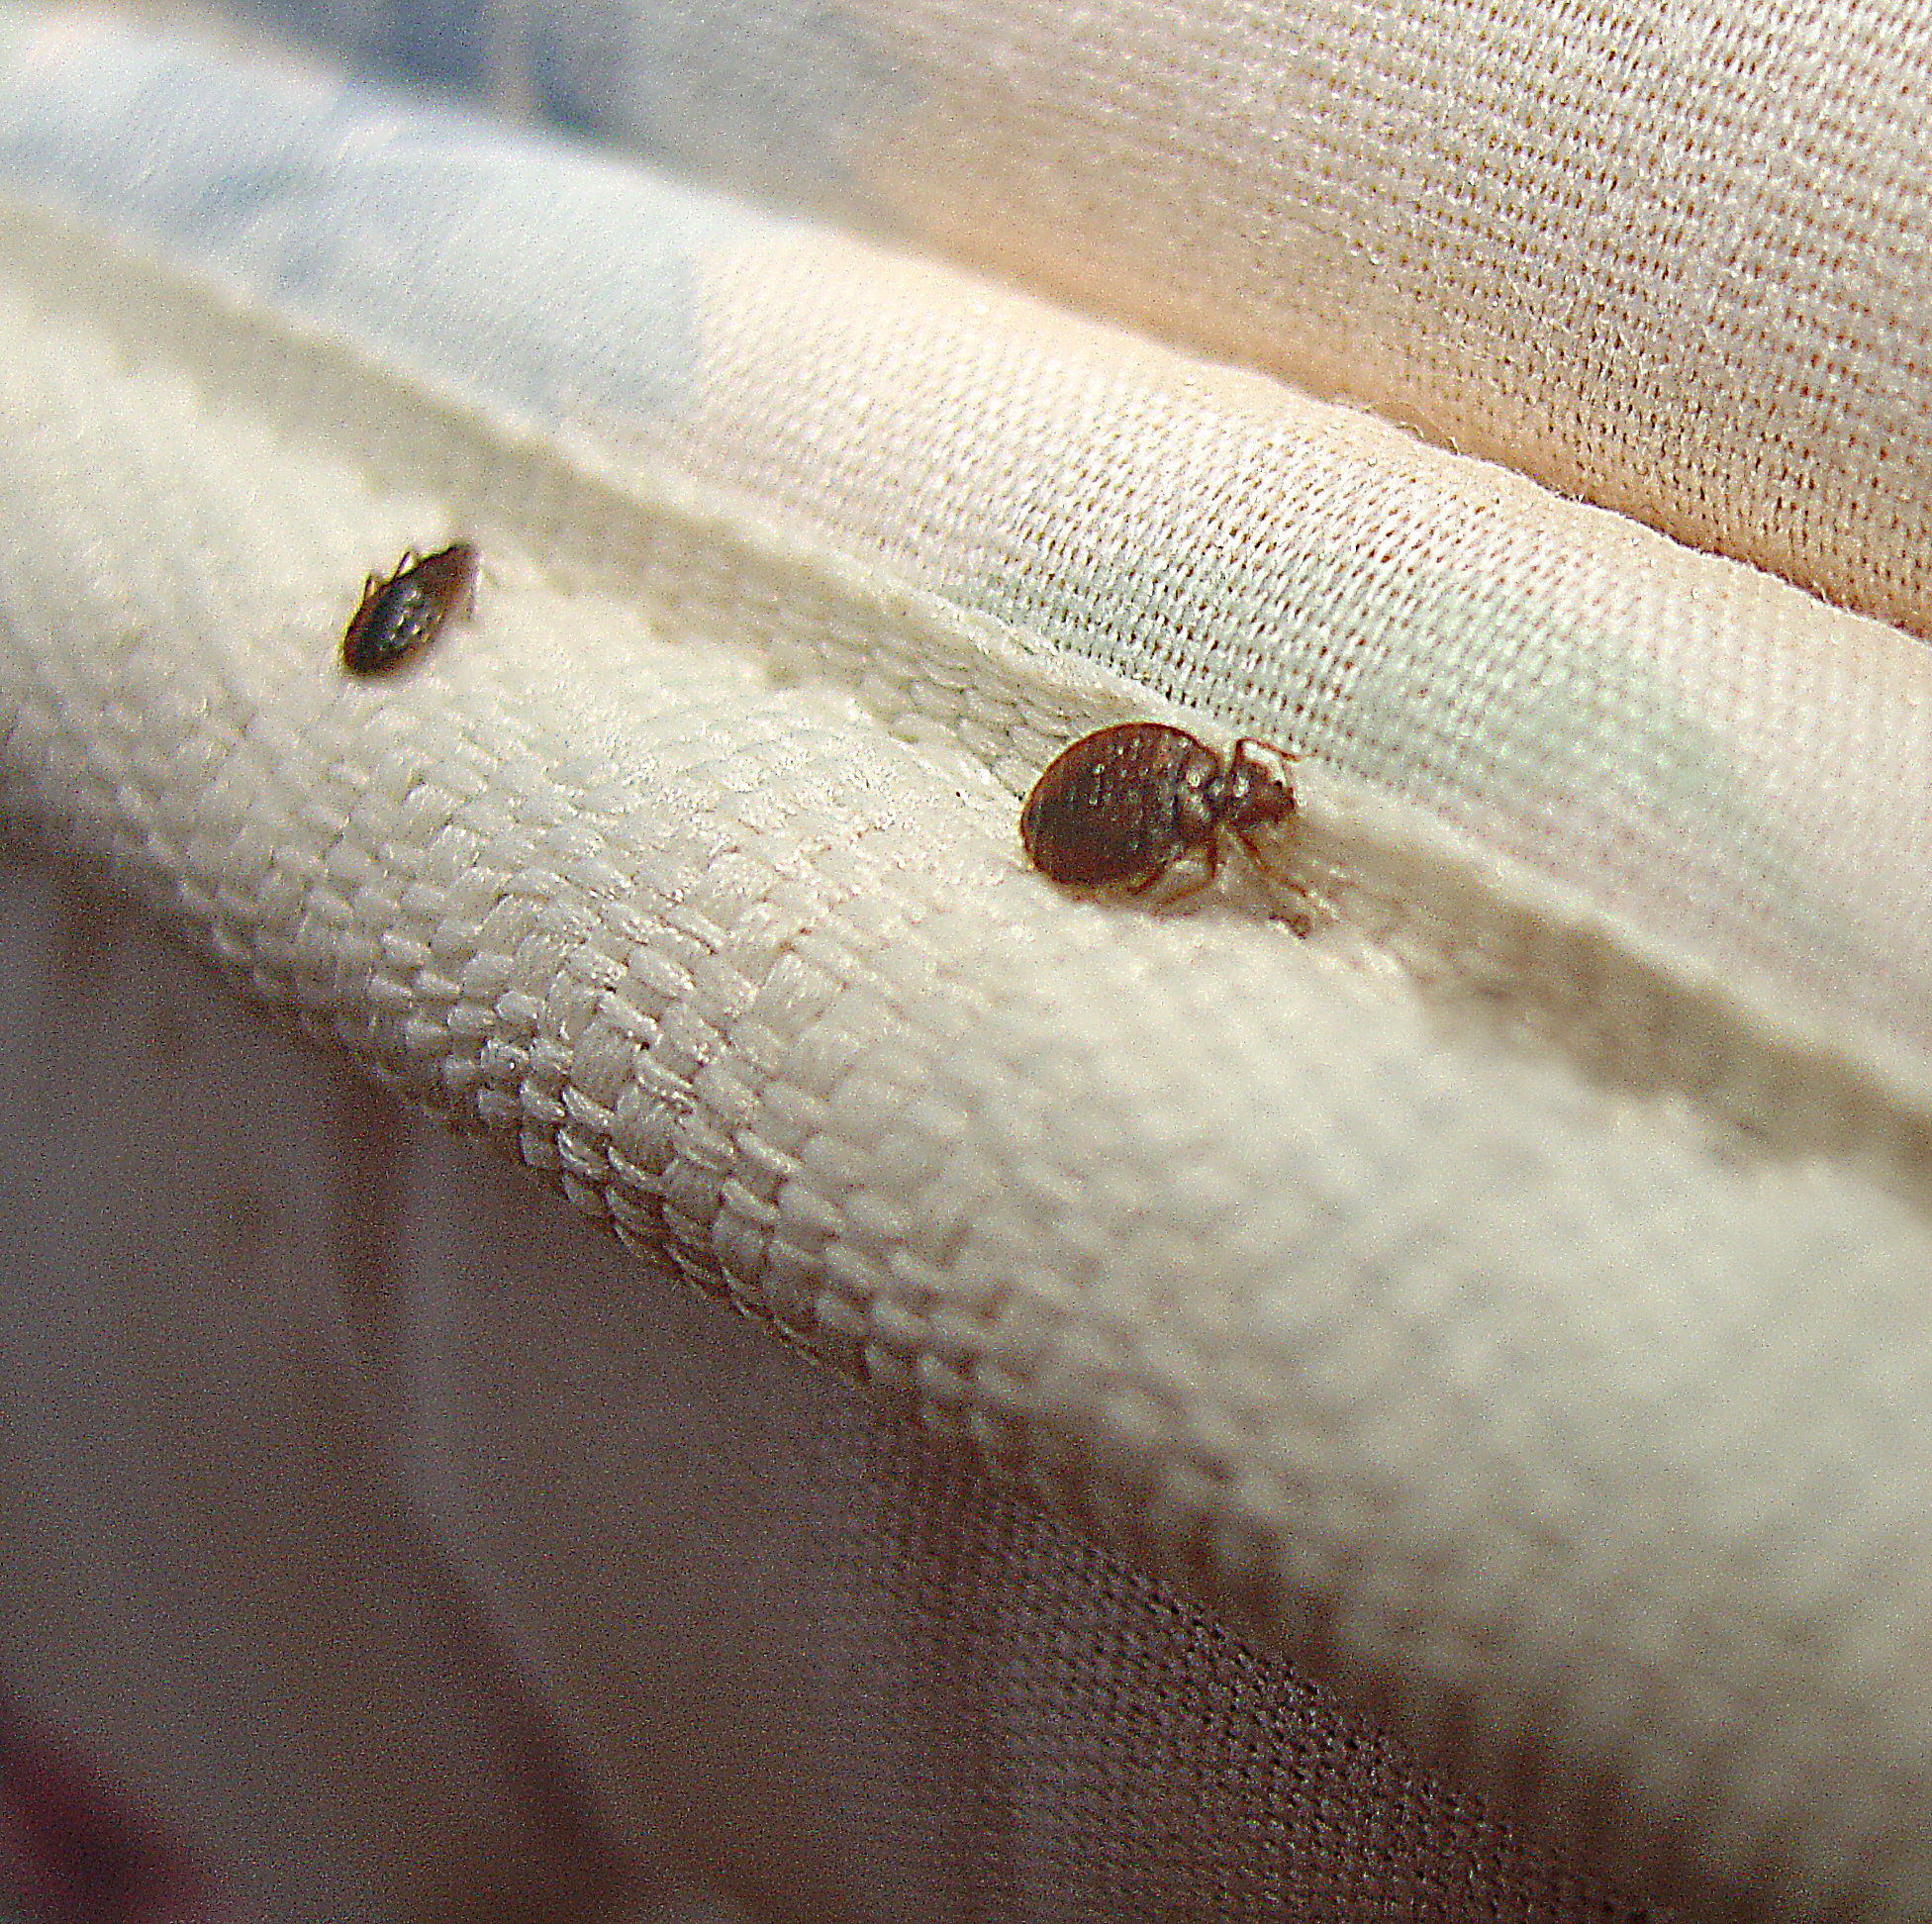 How To Identify Bed Bug Infestations